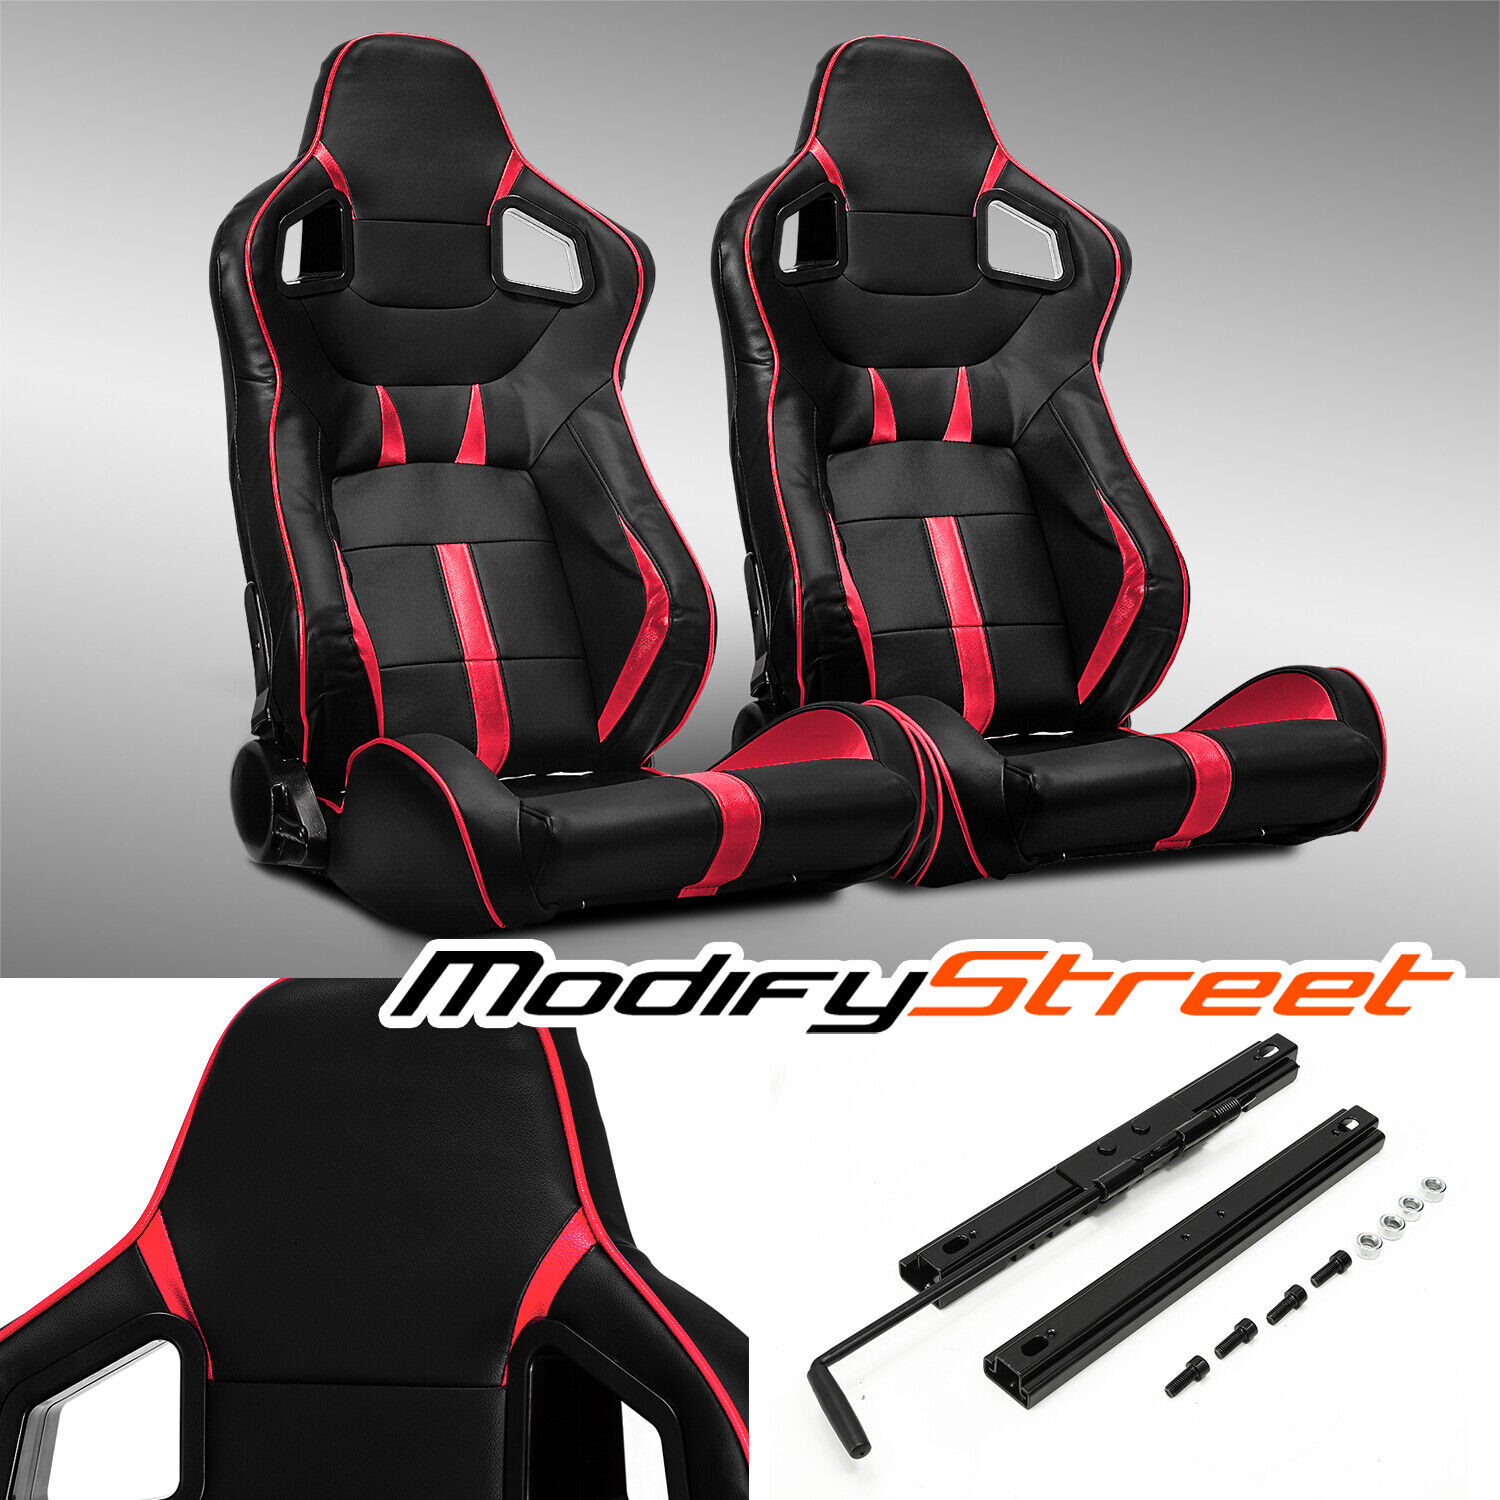 2 x BLACK/RED STRIP PVC LEATHER LEFT/RIGHT SPORT RACING BUCKET SEATS + SLIDER